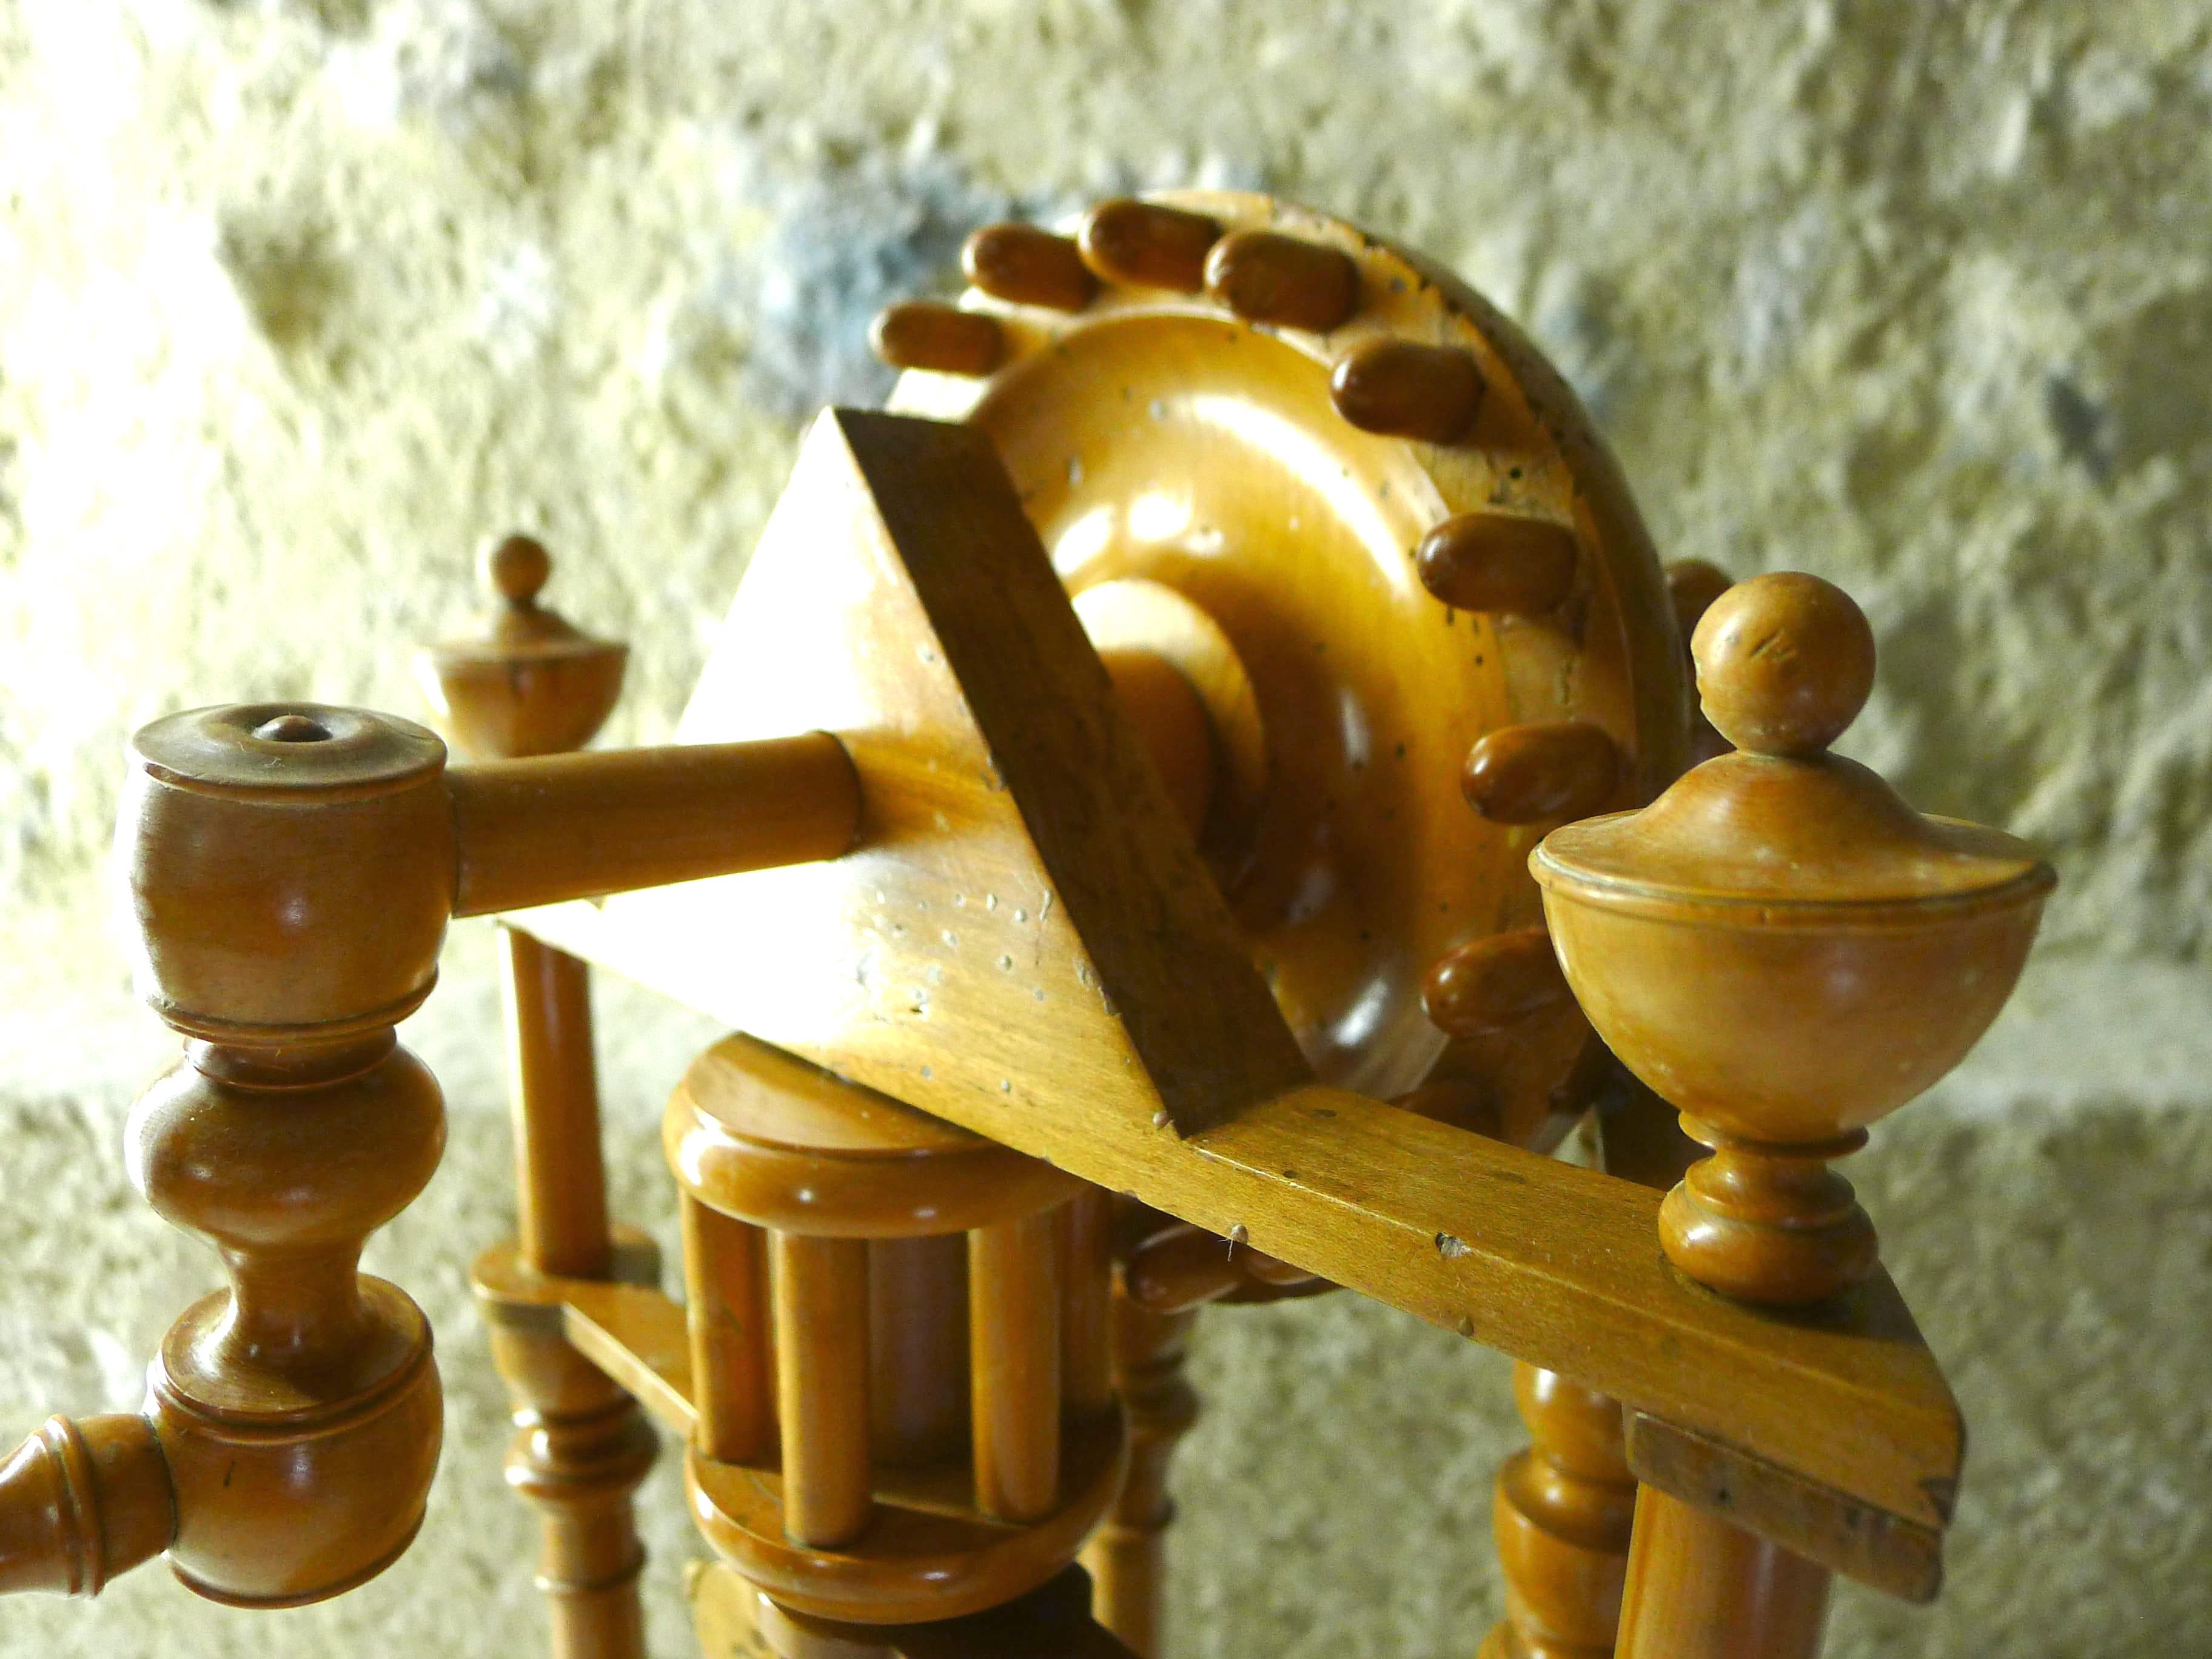 Wooden geared crank table churn, glass body. Rotating axis with perpendicular blades. Identical to the museum in Fécamp (Normandy).

Baratte de table à manivelle à engrenage en bois, corps en verre.Axe rotatif à pales